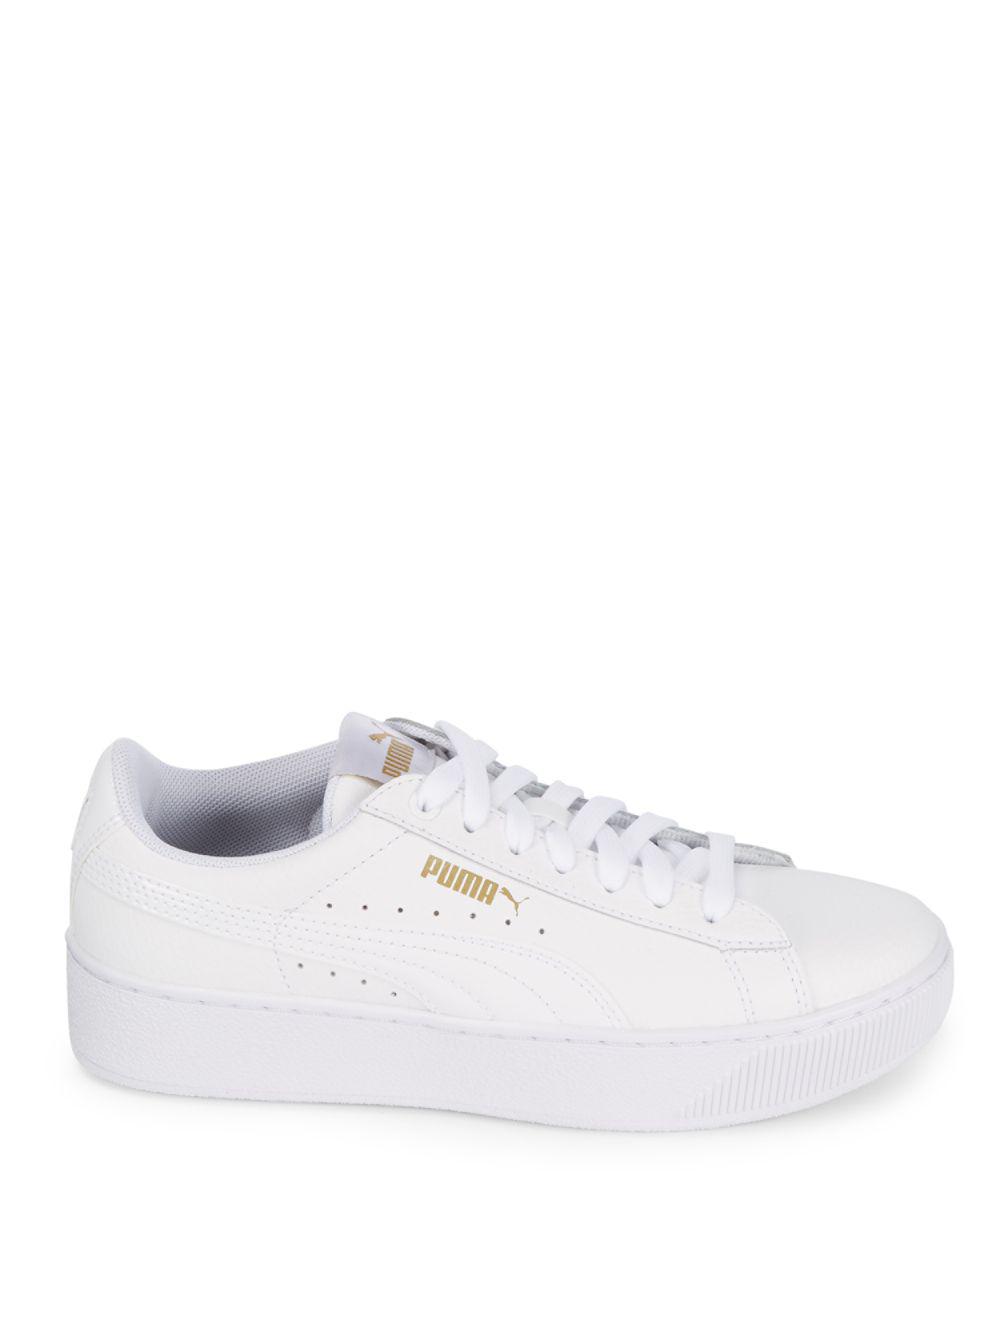 PUMA Lace-up Round Toe Sneakers in White | Lyst